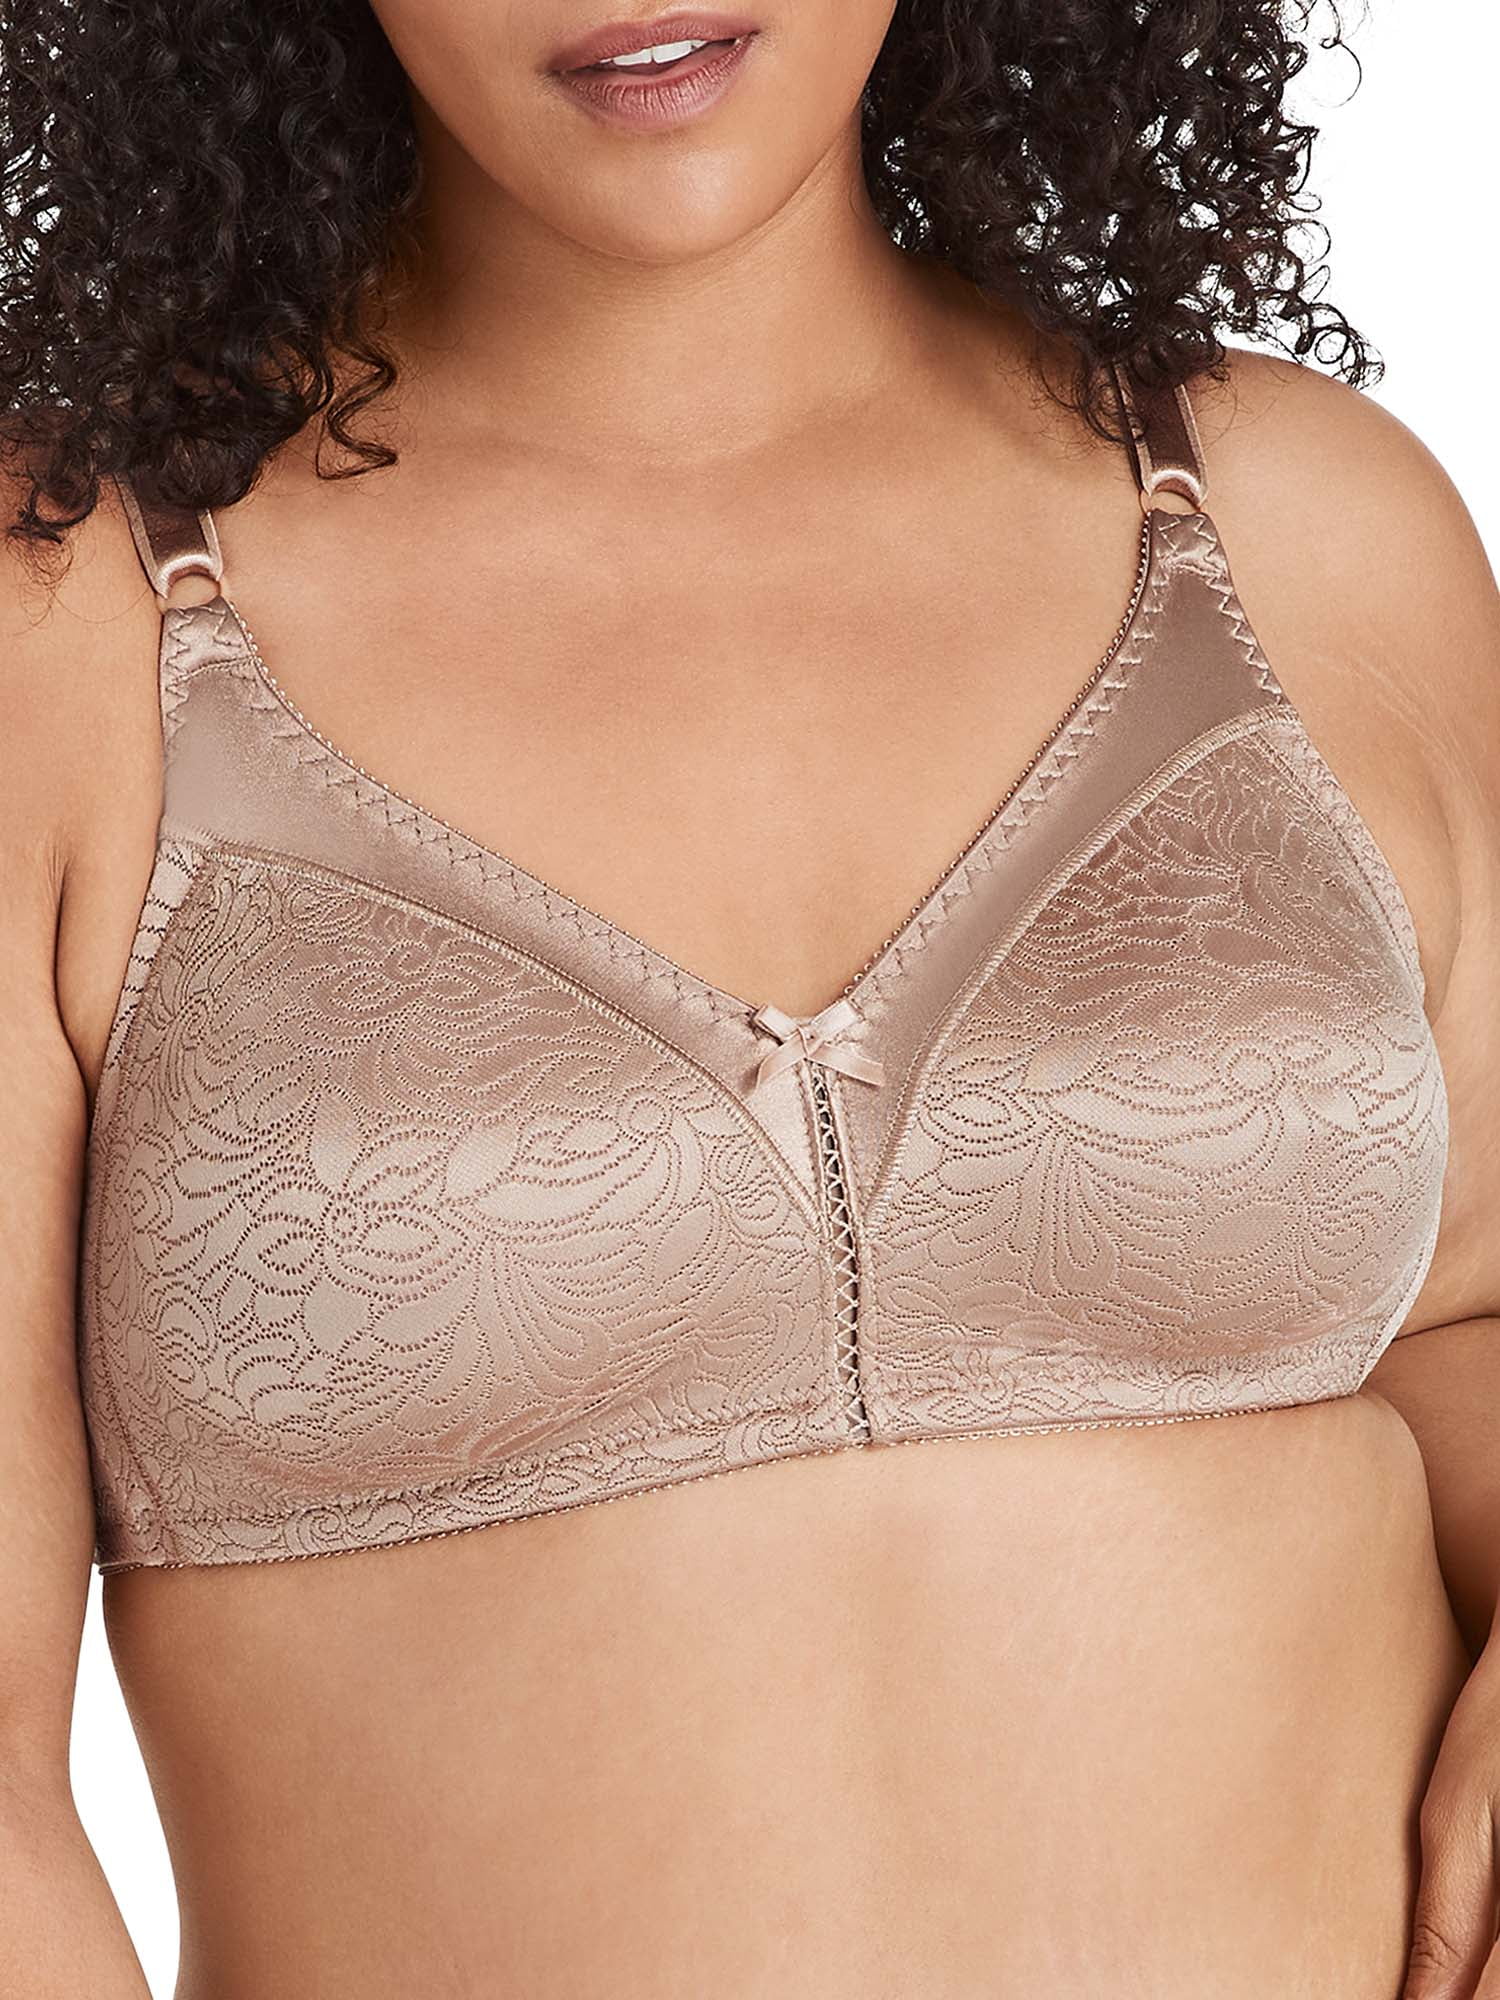 privatejet, 40b) - Women's Double Support Lace Wirefree Bra, Style 3372.  Bali